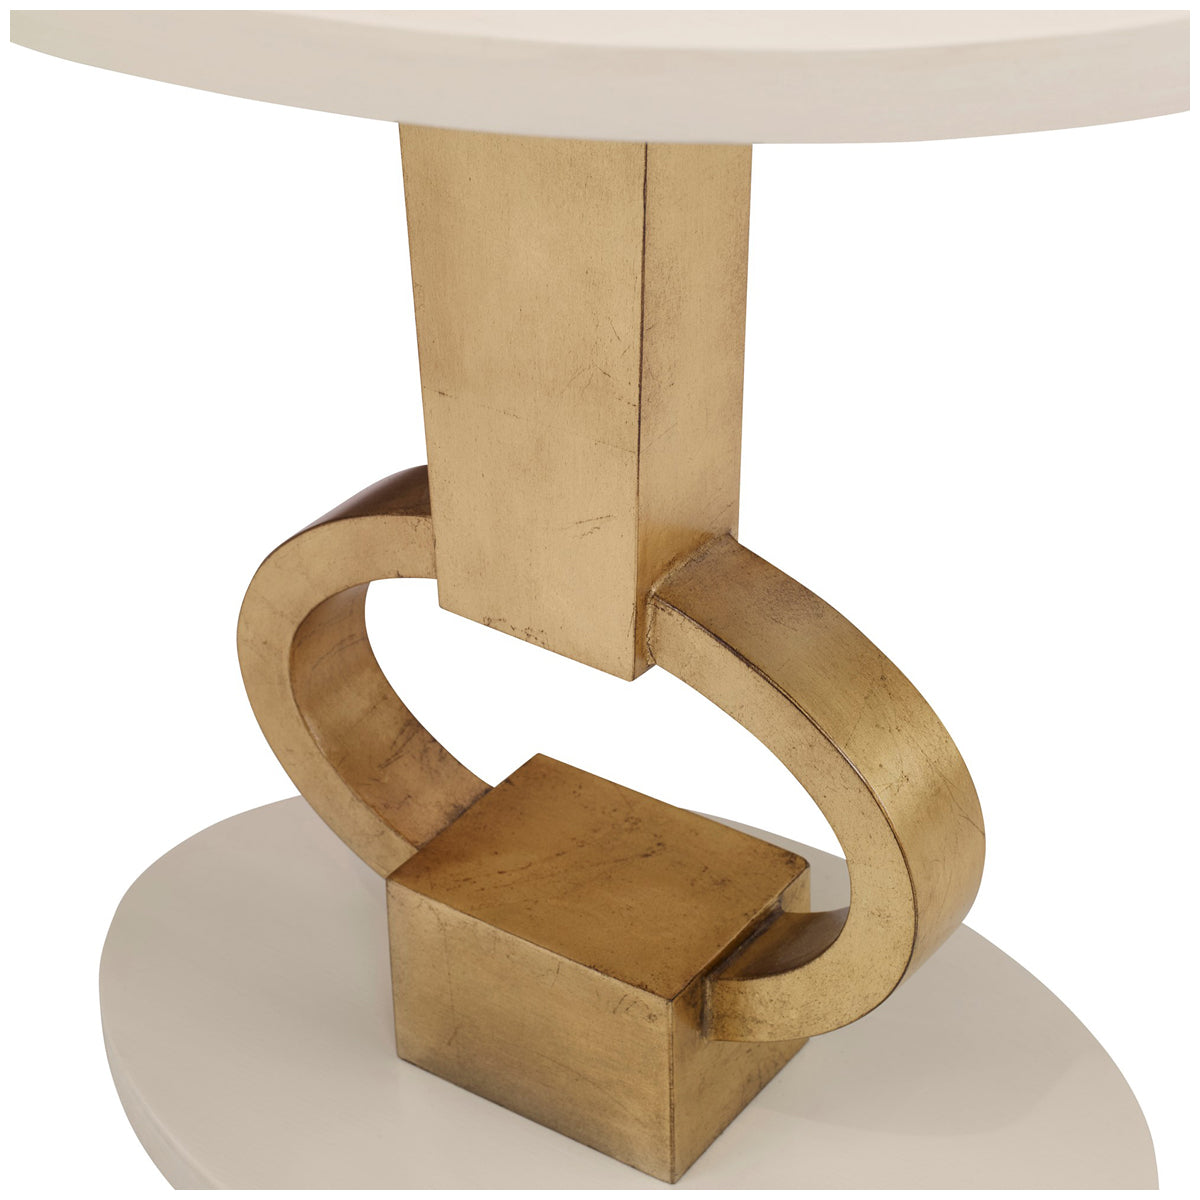 Ambella Home Vision Accent Table